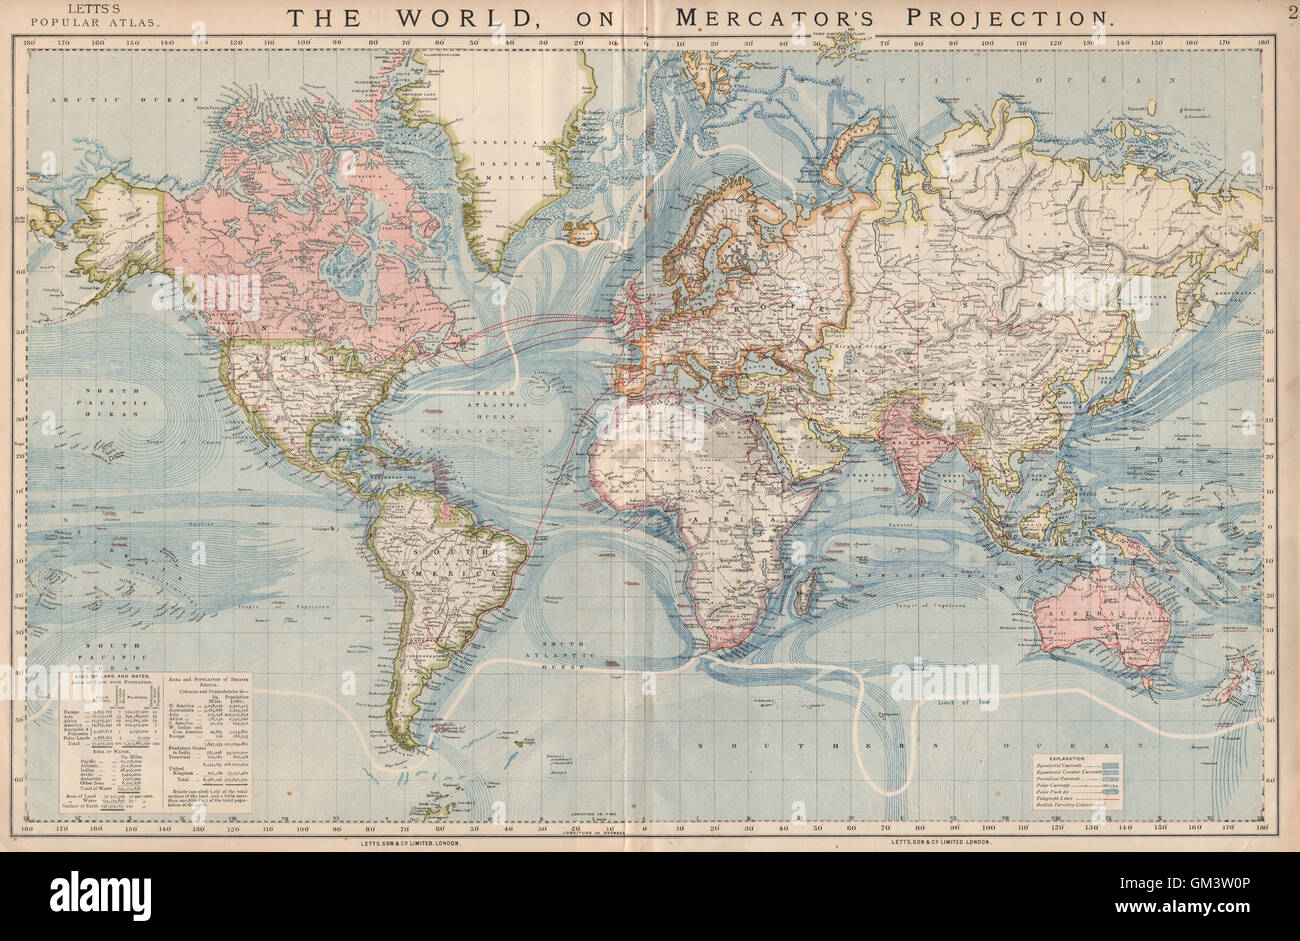 map of the british empire 1889 World On Mercator S Projection British Empire Telegraph Cables Stock Photo Alamy map of the british empire 1889